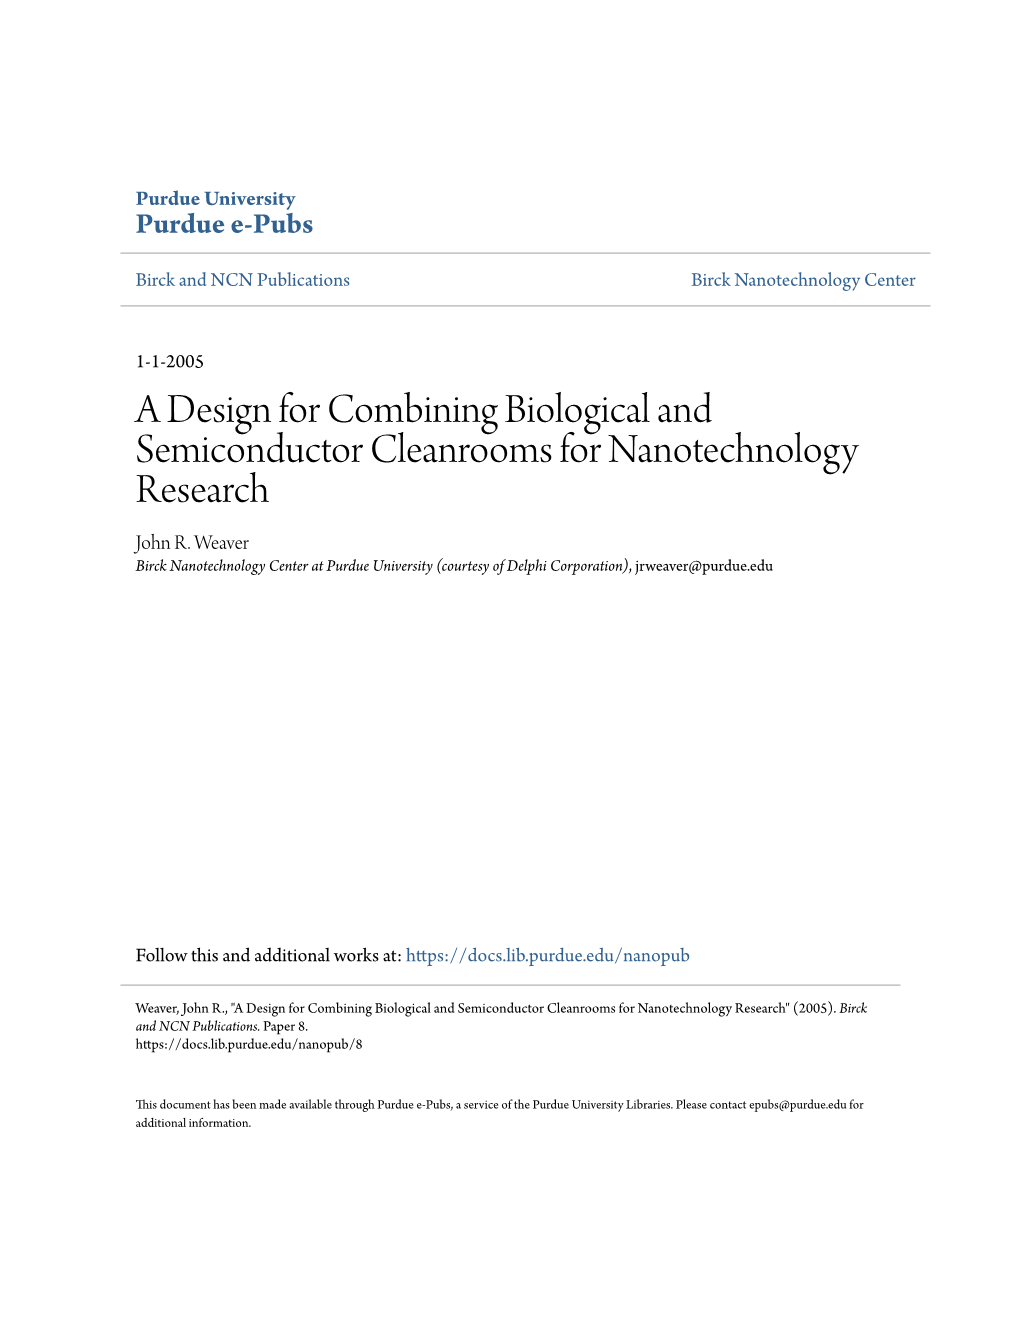 A Design for Combining Biological and Semiconductor Cleanrooms for Nanotechnology Research John R